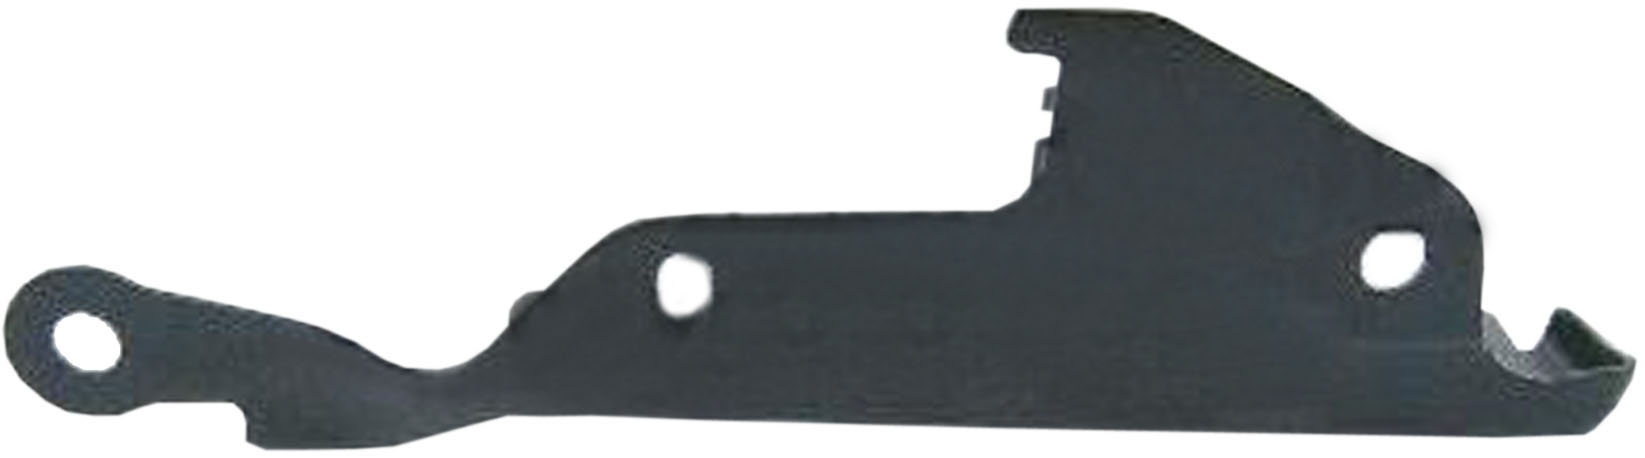 Aftermarket HOOD HINGES for CHEVROLET - AVALANCHE 1500, AVALANCHE 1500,02-06,Hood hinge assy